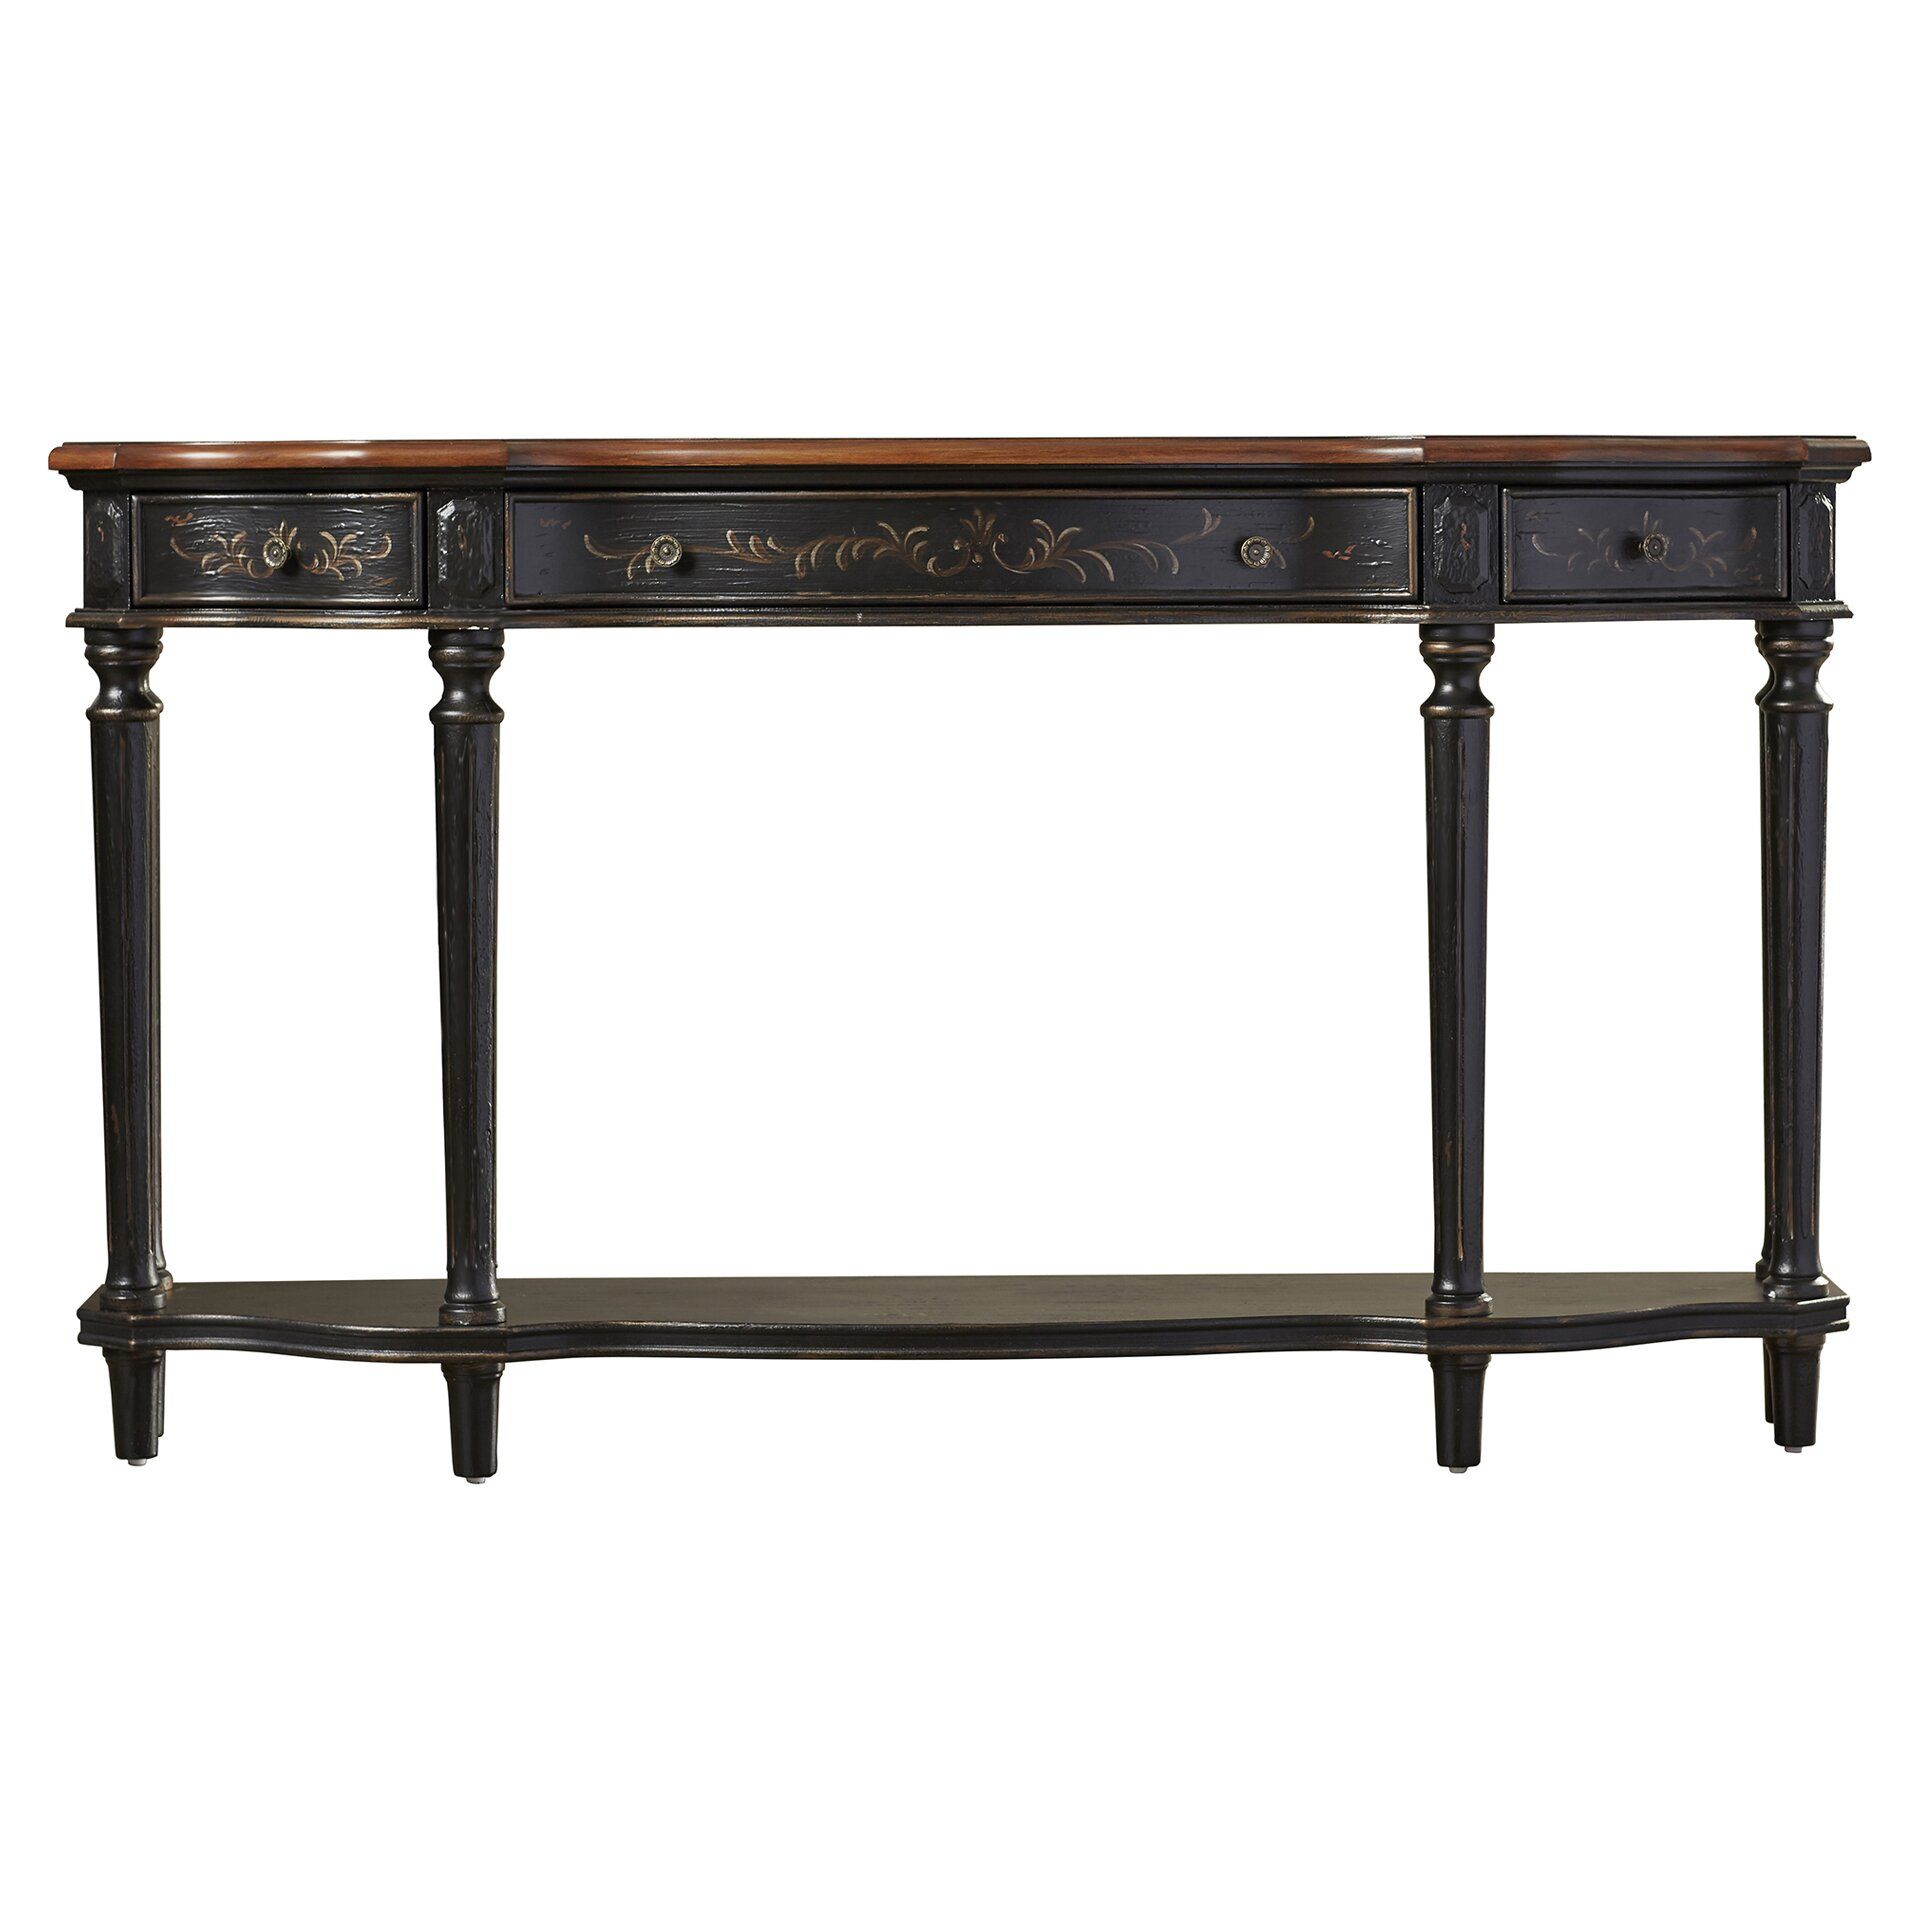 Rosalind Wheeler Pinehill Antique Console Table & Reviews | Wayfair With Regard To Vintage Coal Console Tables (View 15 of 20)